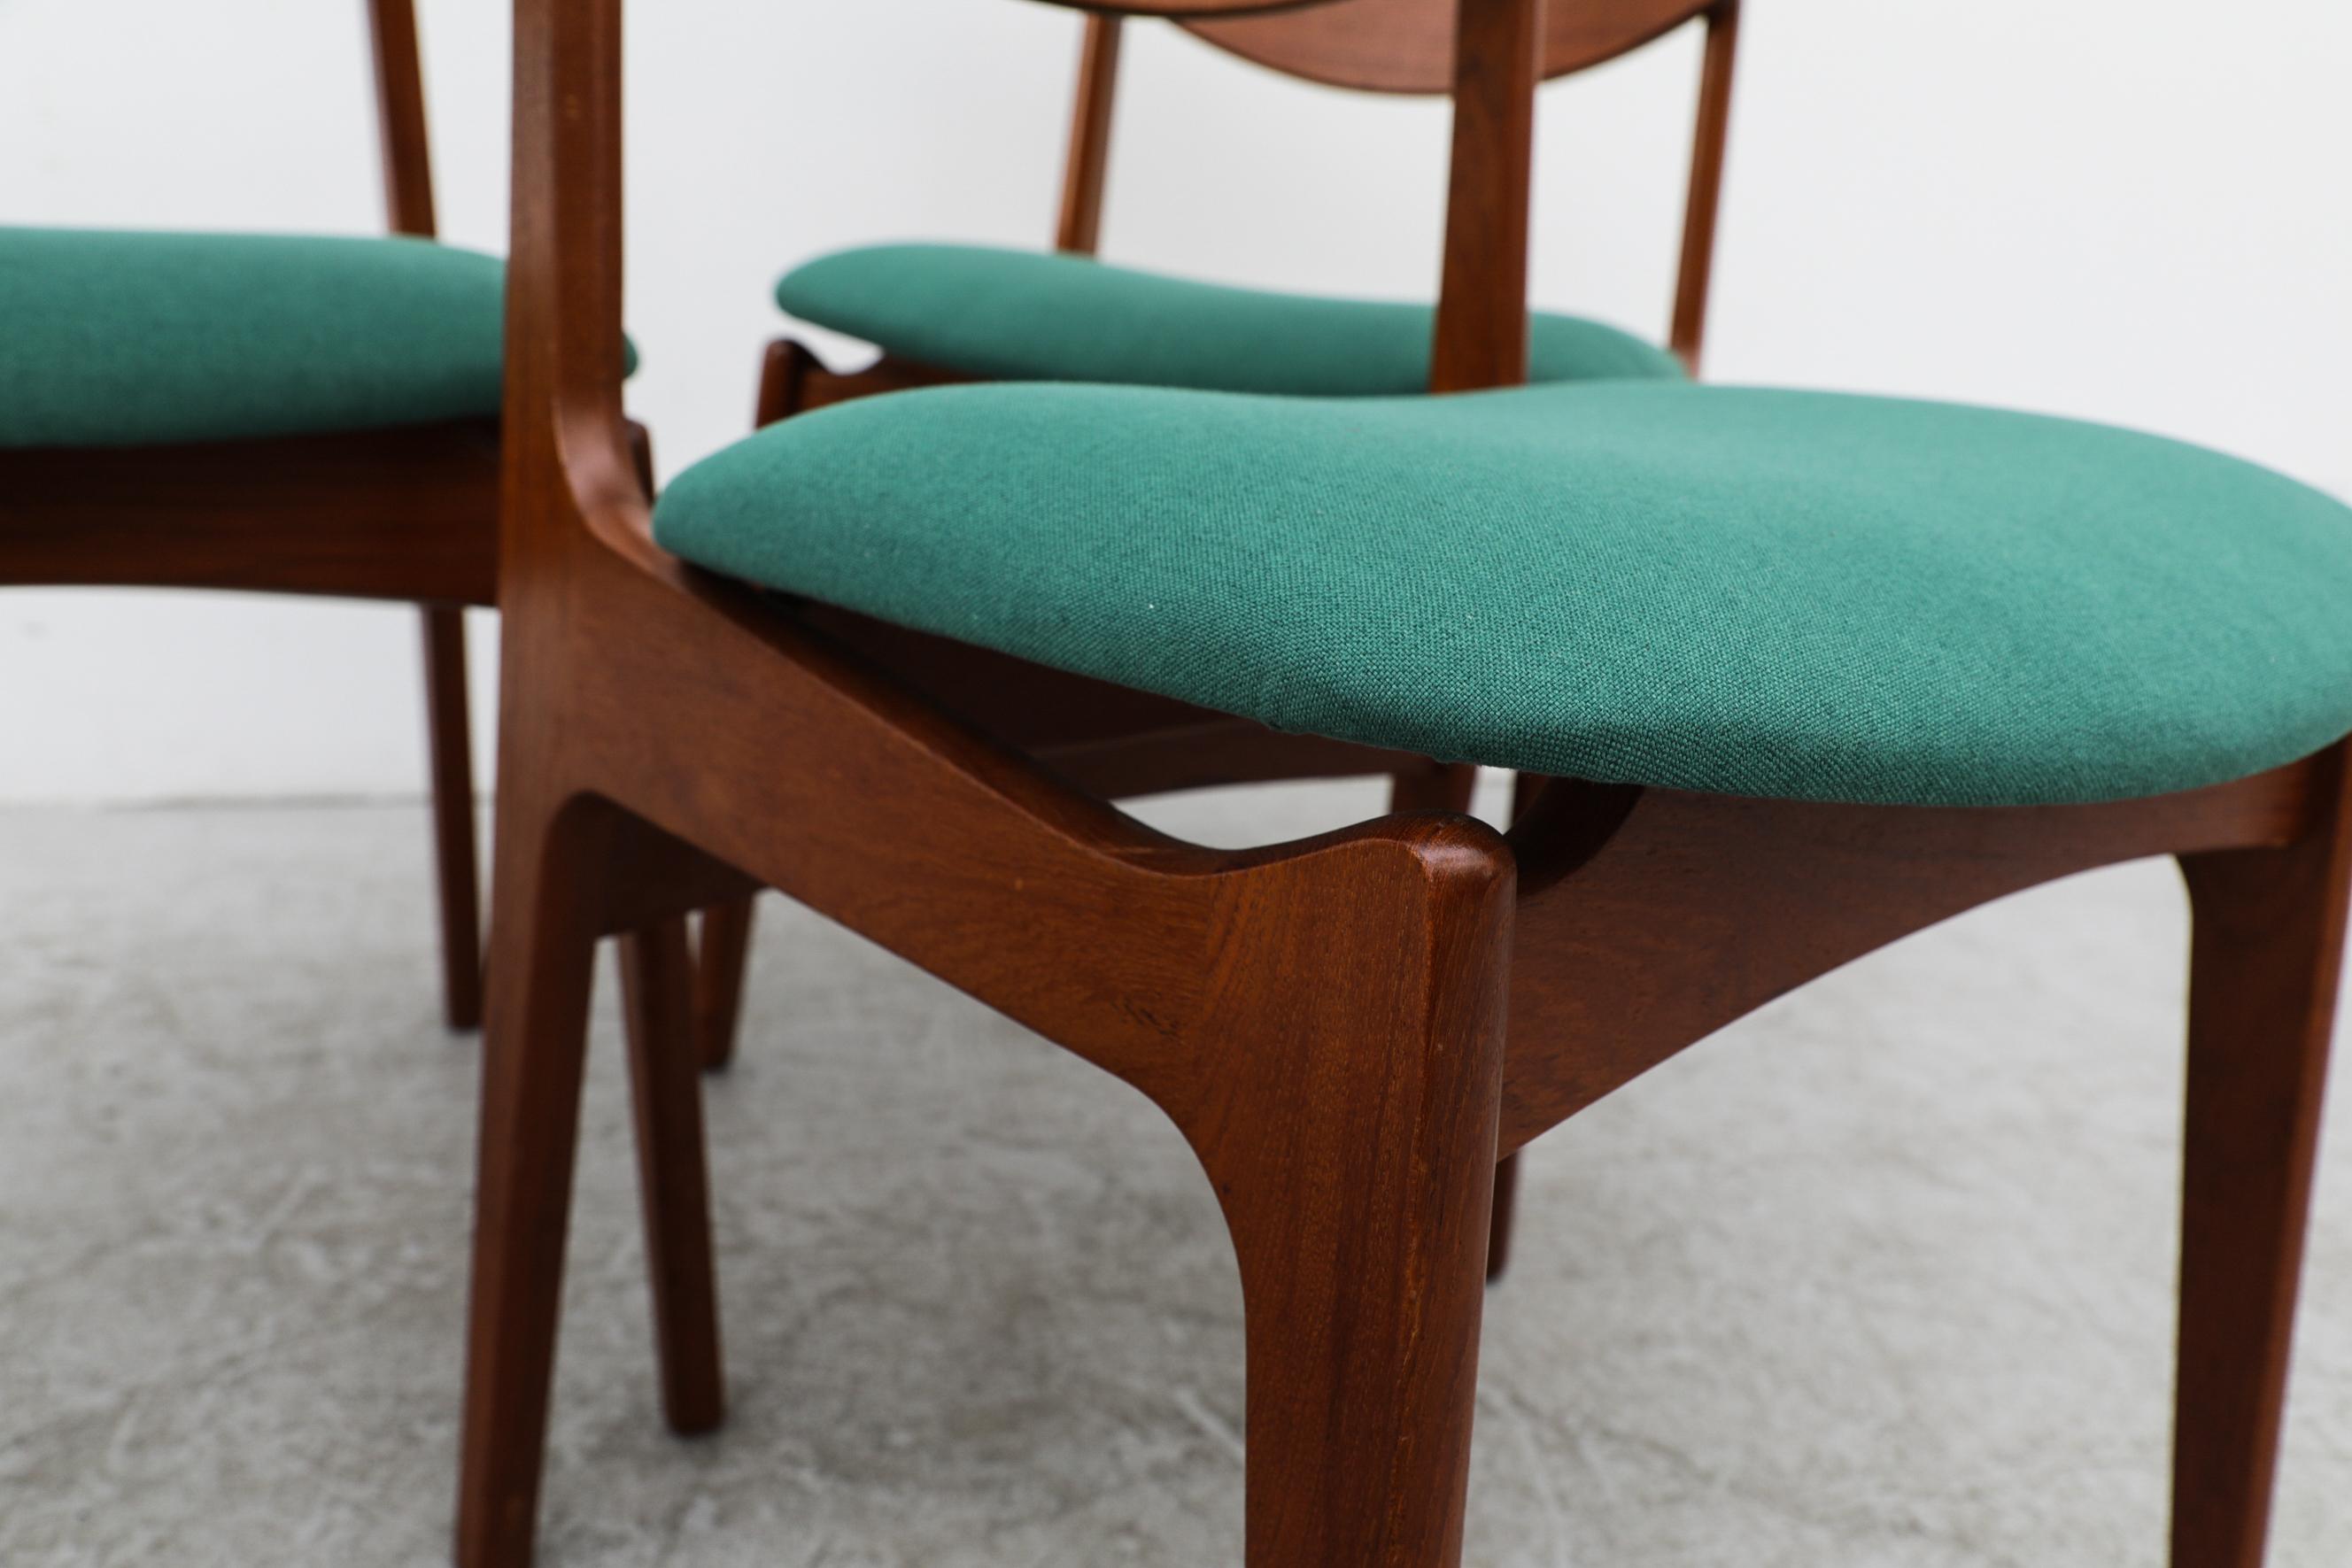 Set of 4 Danish Teak Dining Chairs by Funder Schmidt + Madsen w/ Teal Seats 7